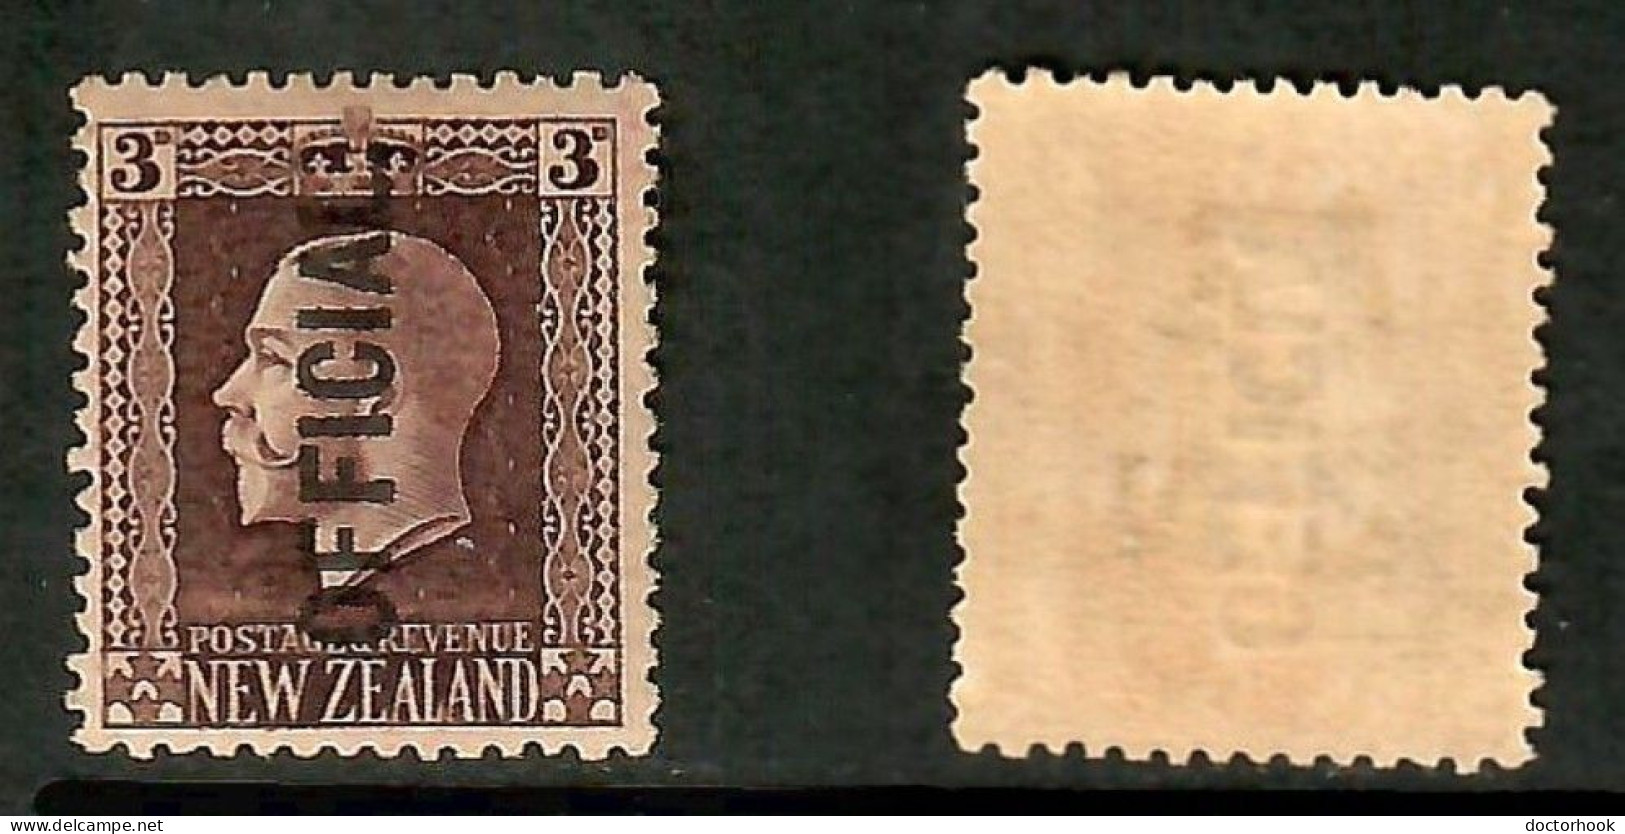 NEW ZEALAND    Scott # O 47** MINT NH (CONDITION PER SCAN) (Stamp Scan # 1042-8) - Service